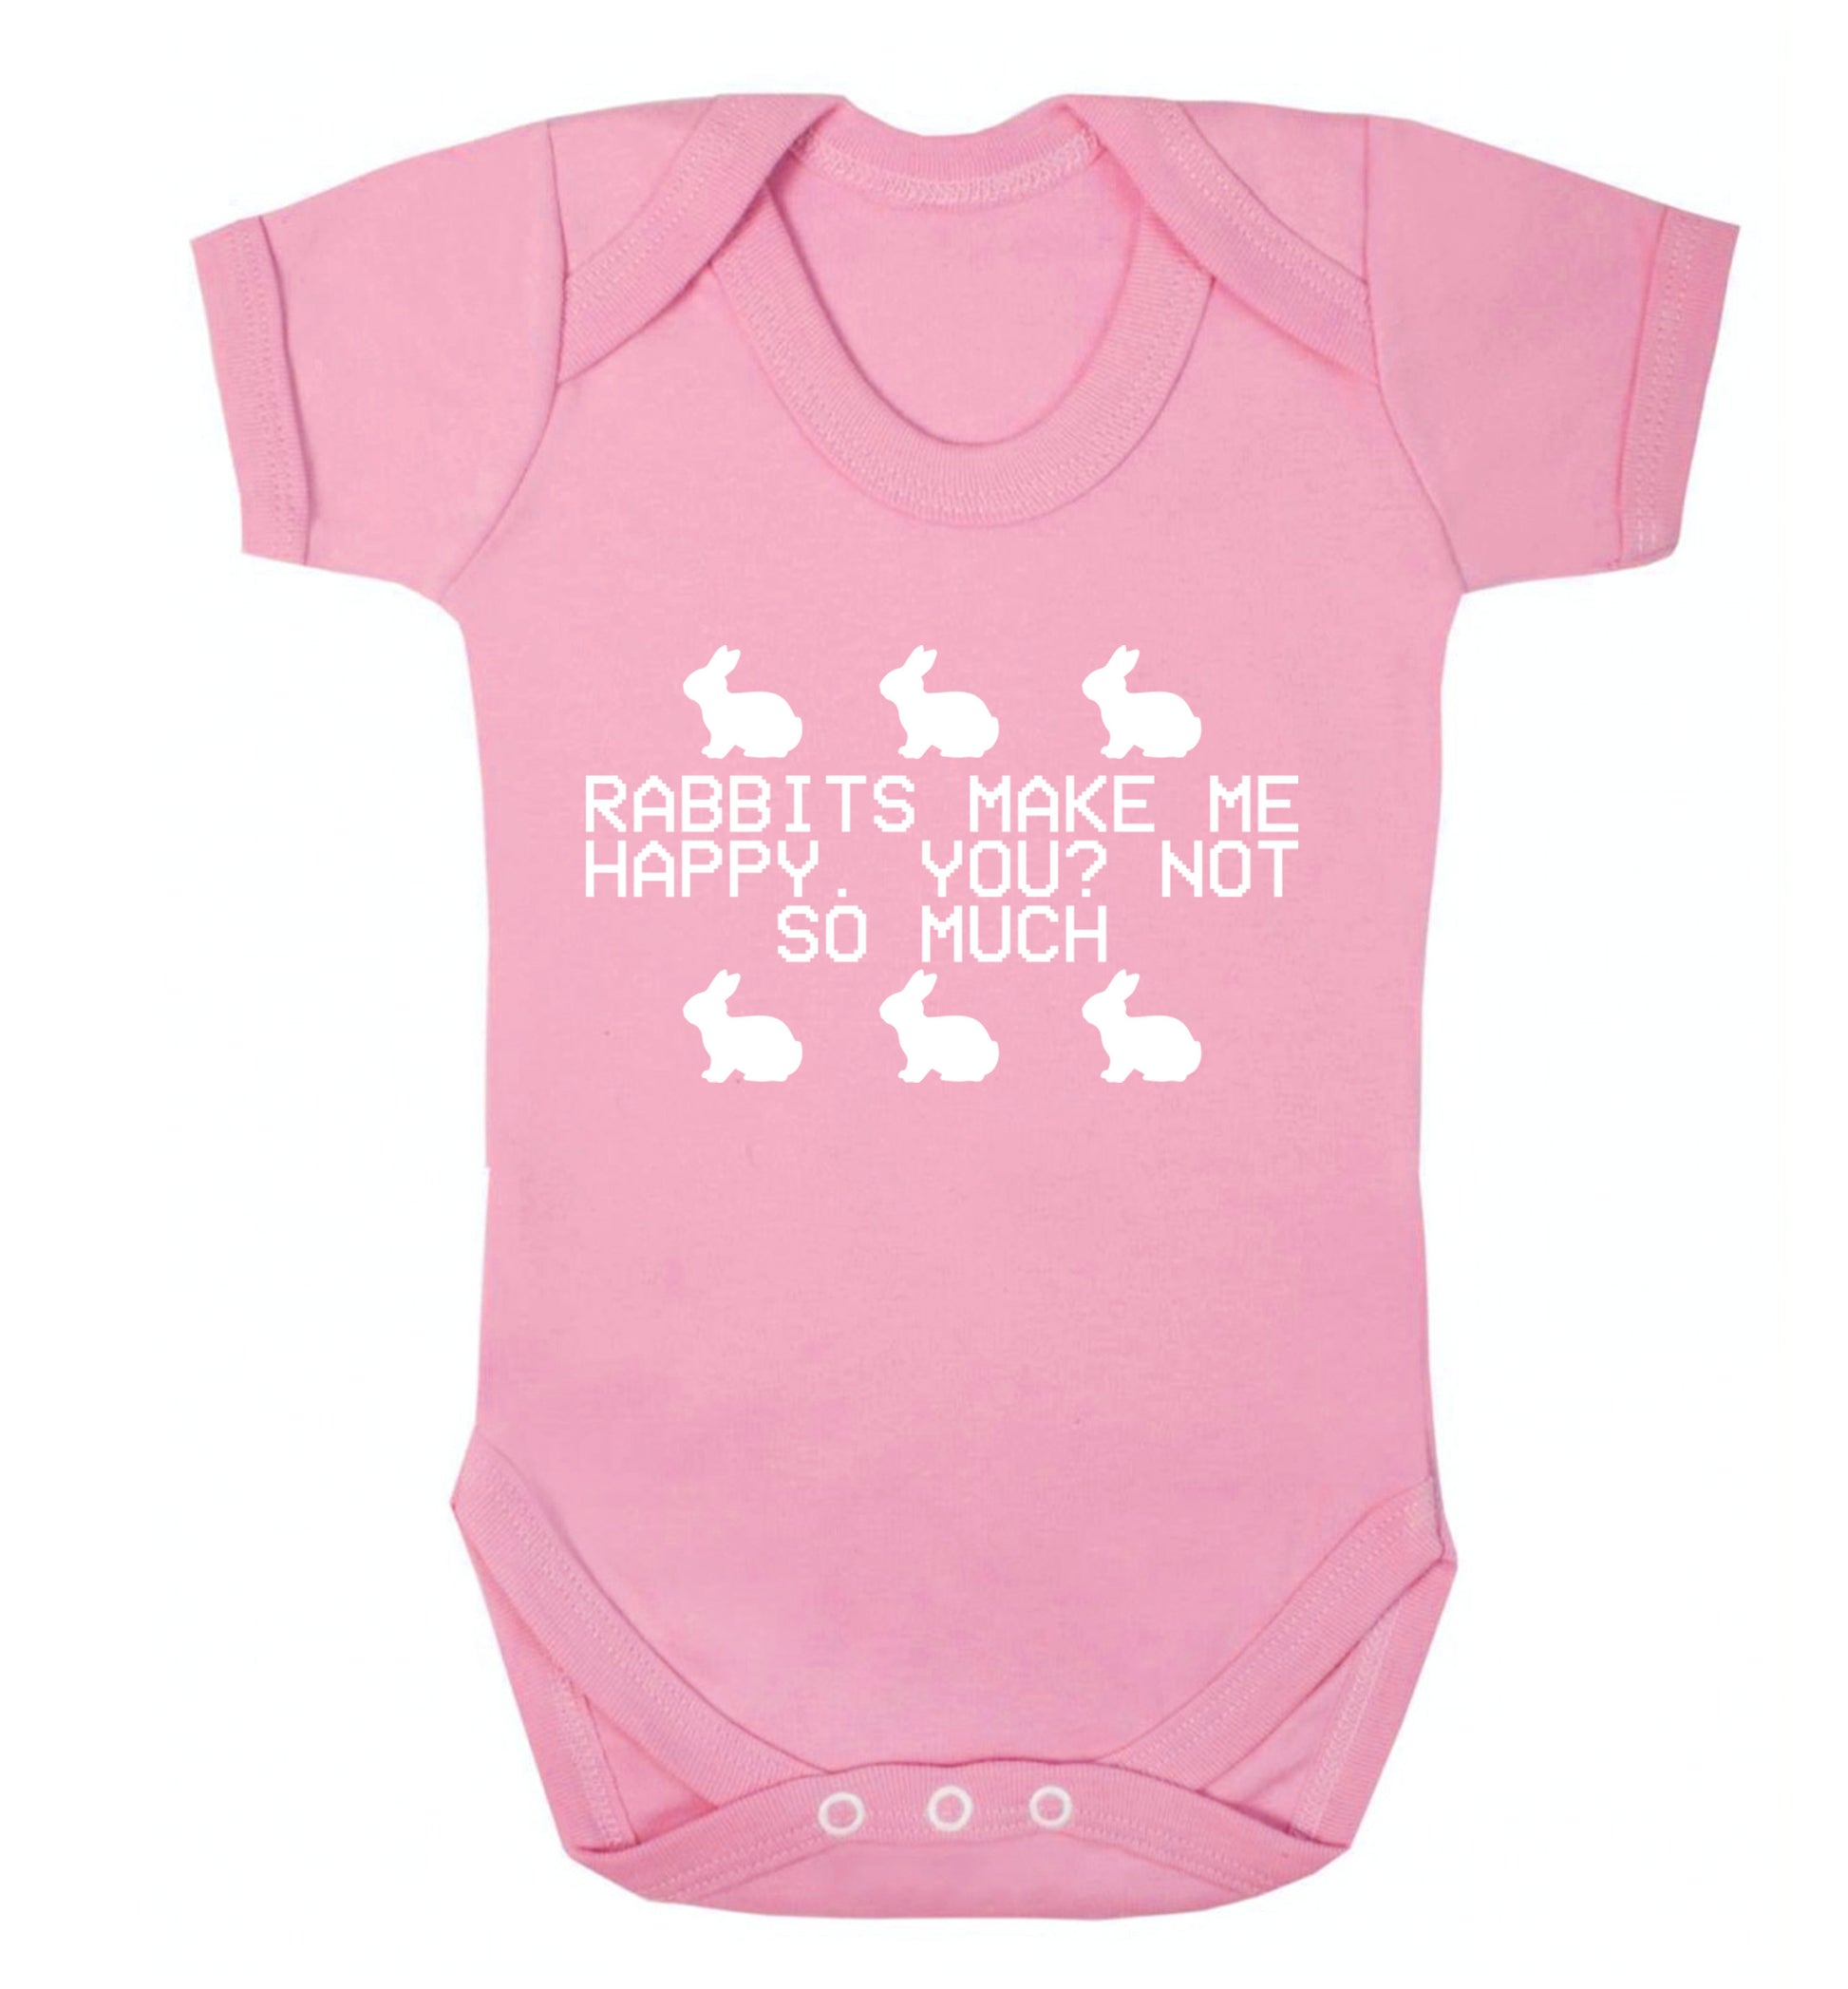 Rabbits make me happy, you not so much Baby Vest pale pink 18-24 months